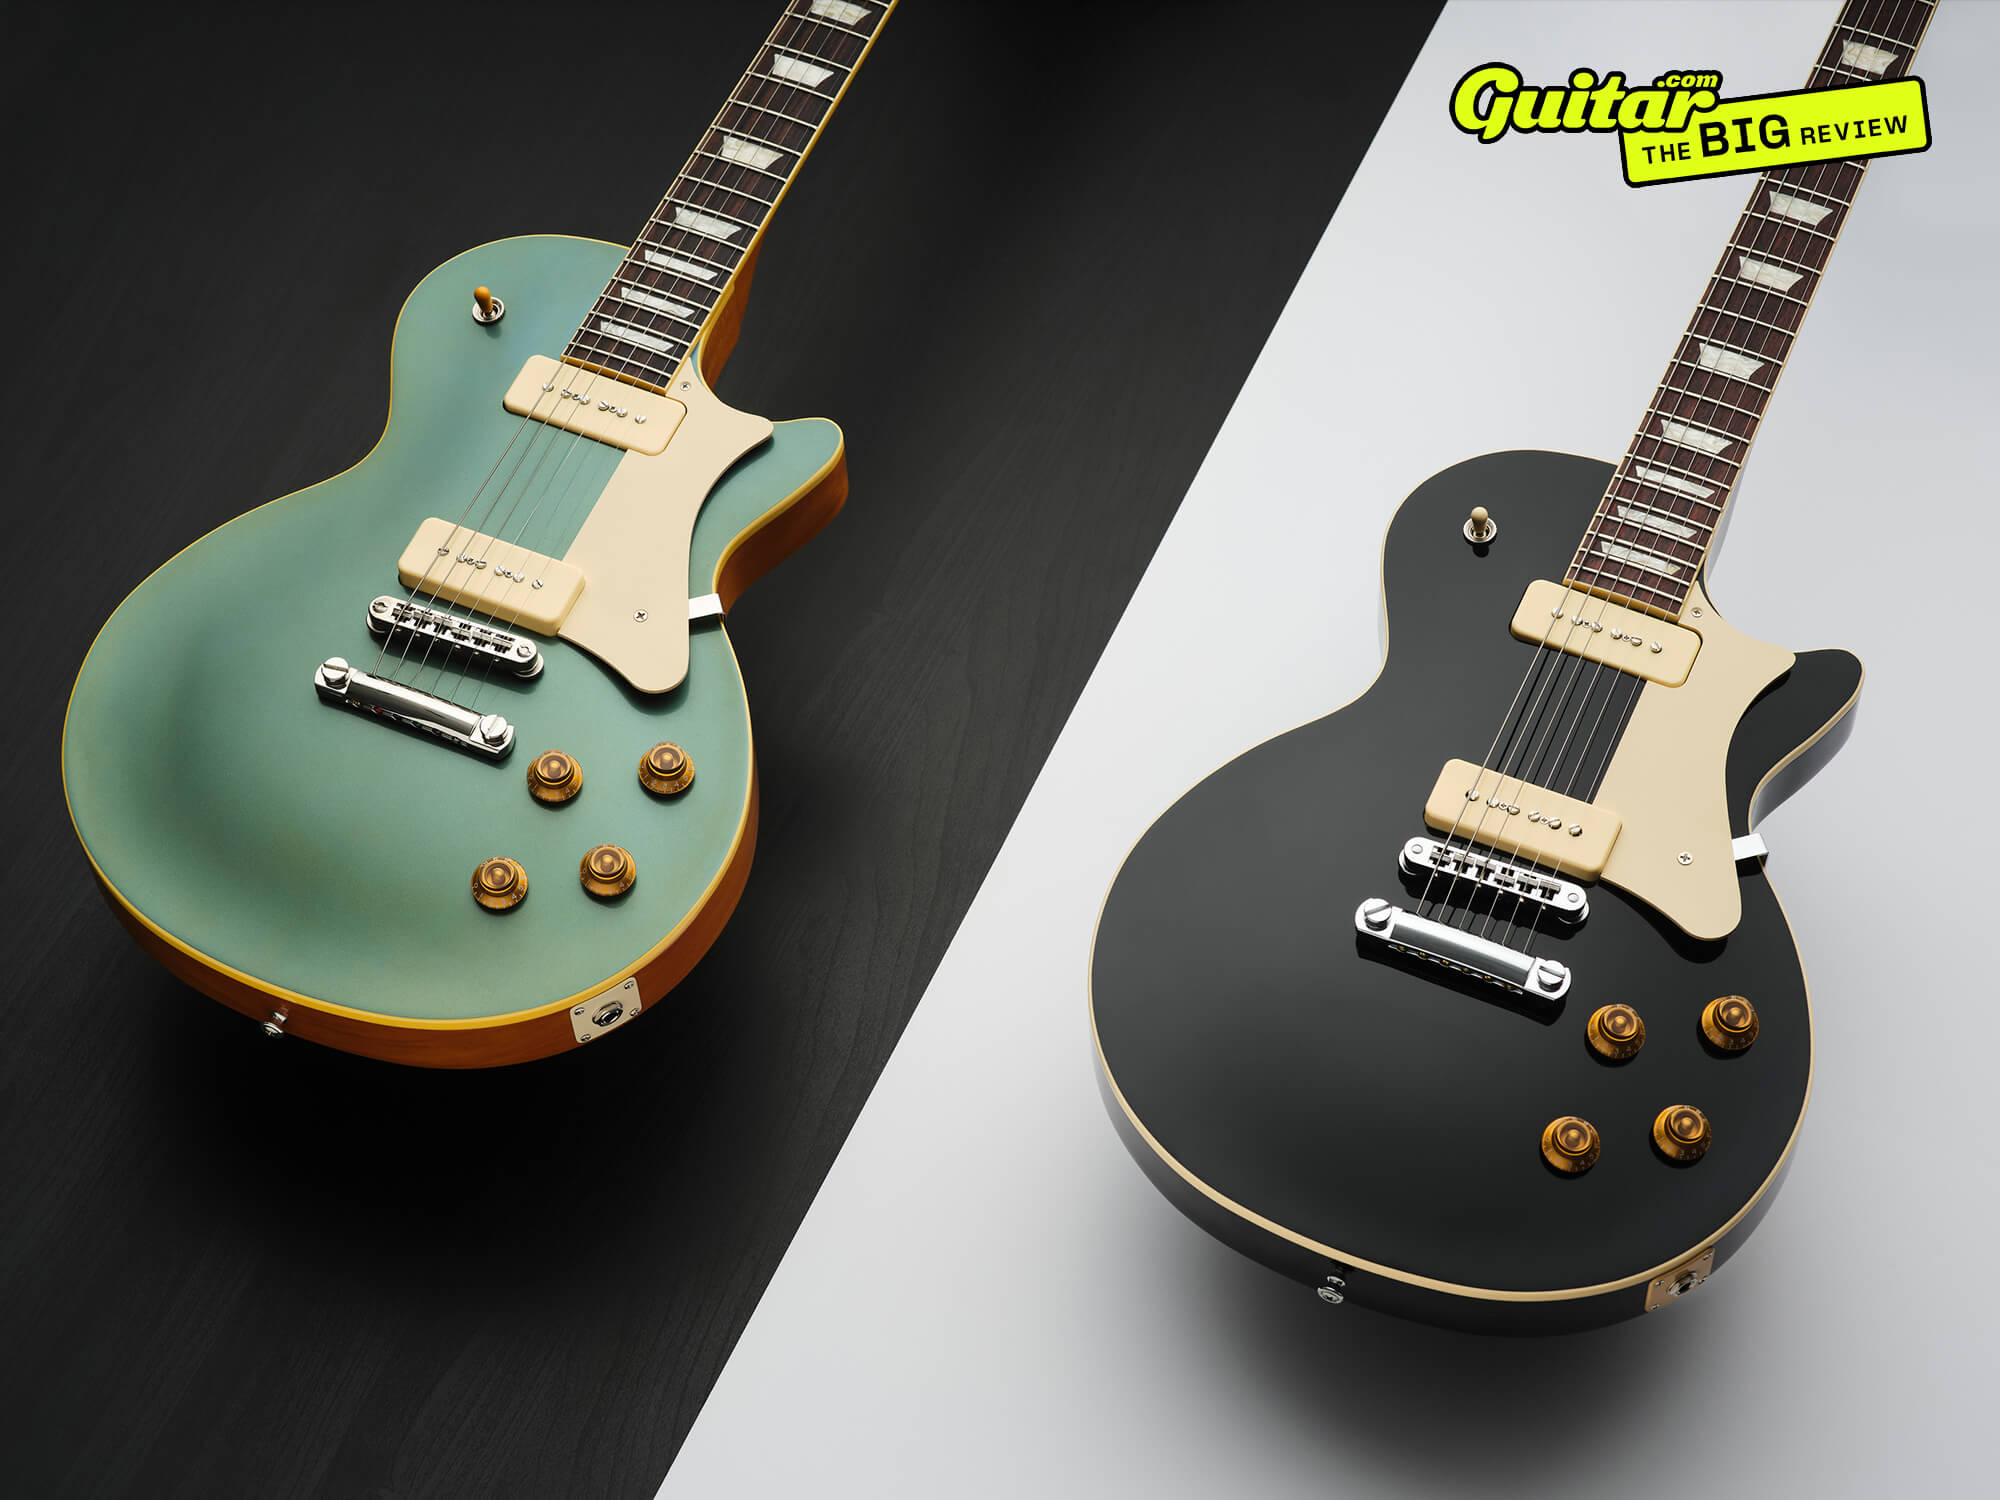 Heritage H-150 P90 Standard (black) and Custom Core (blue) by Adam Gasson